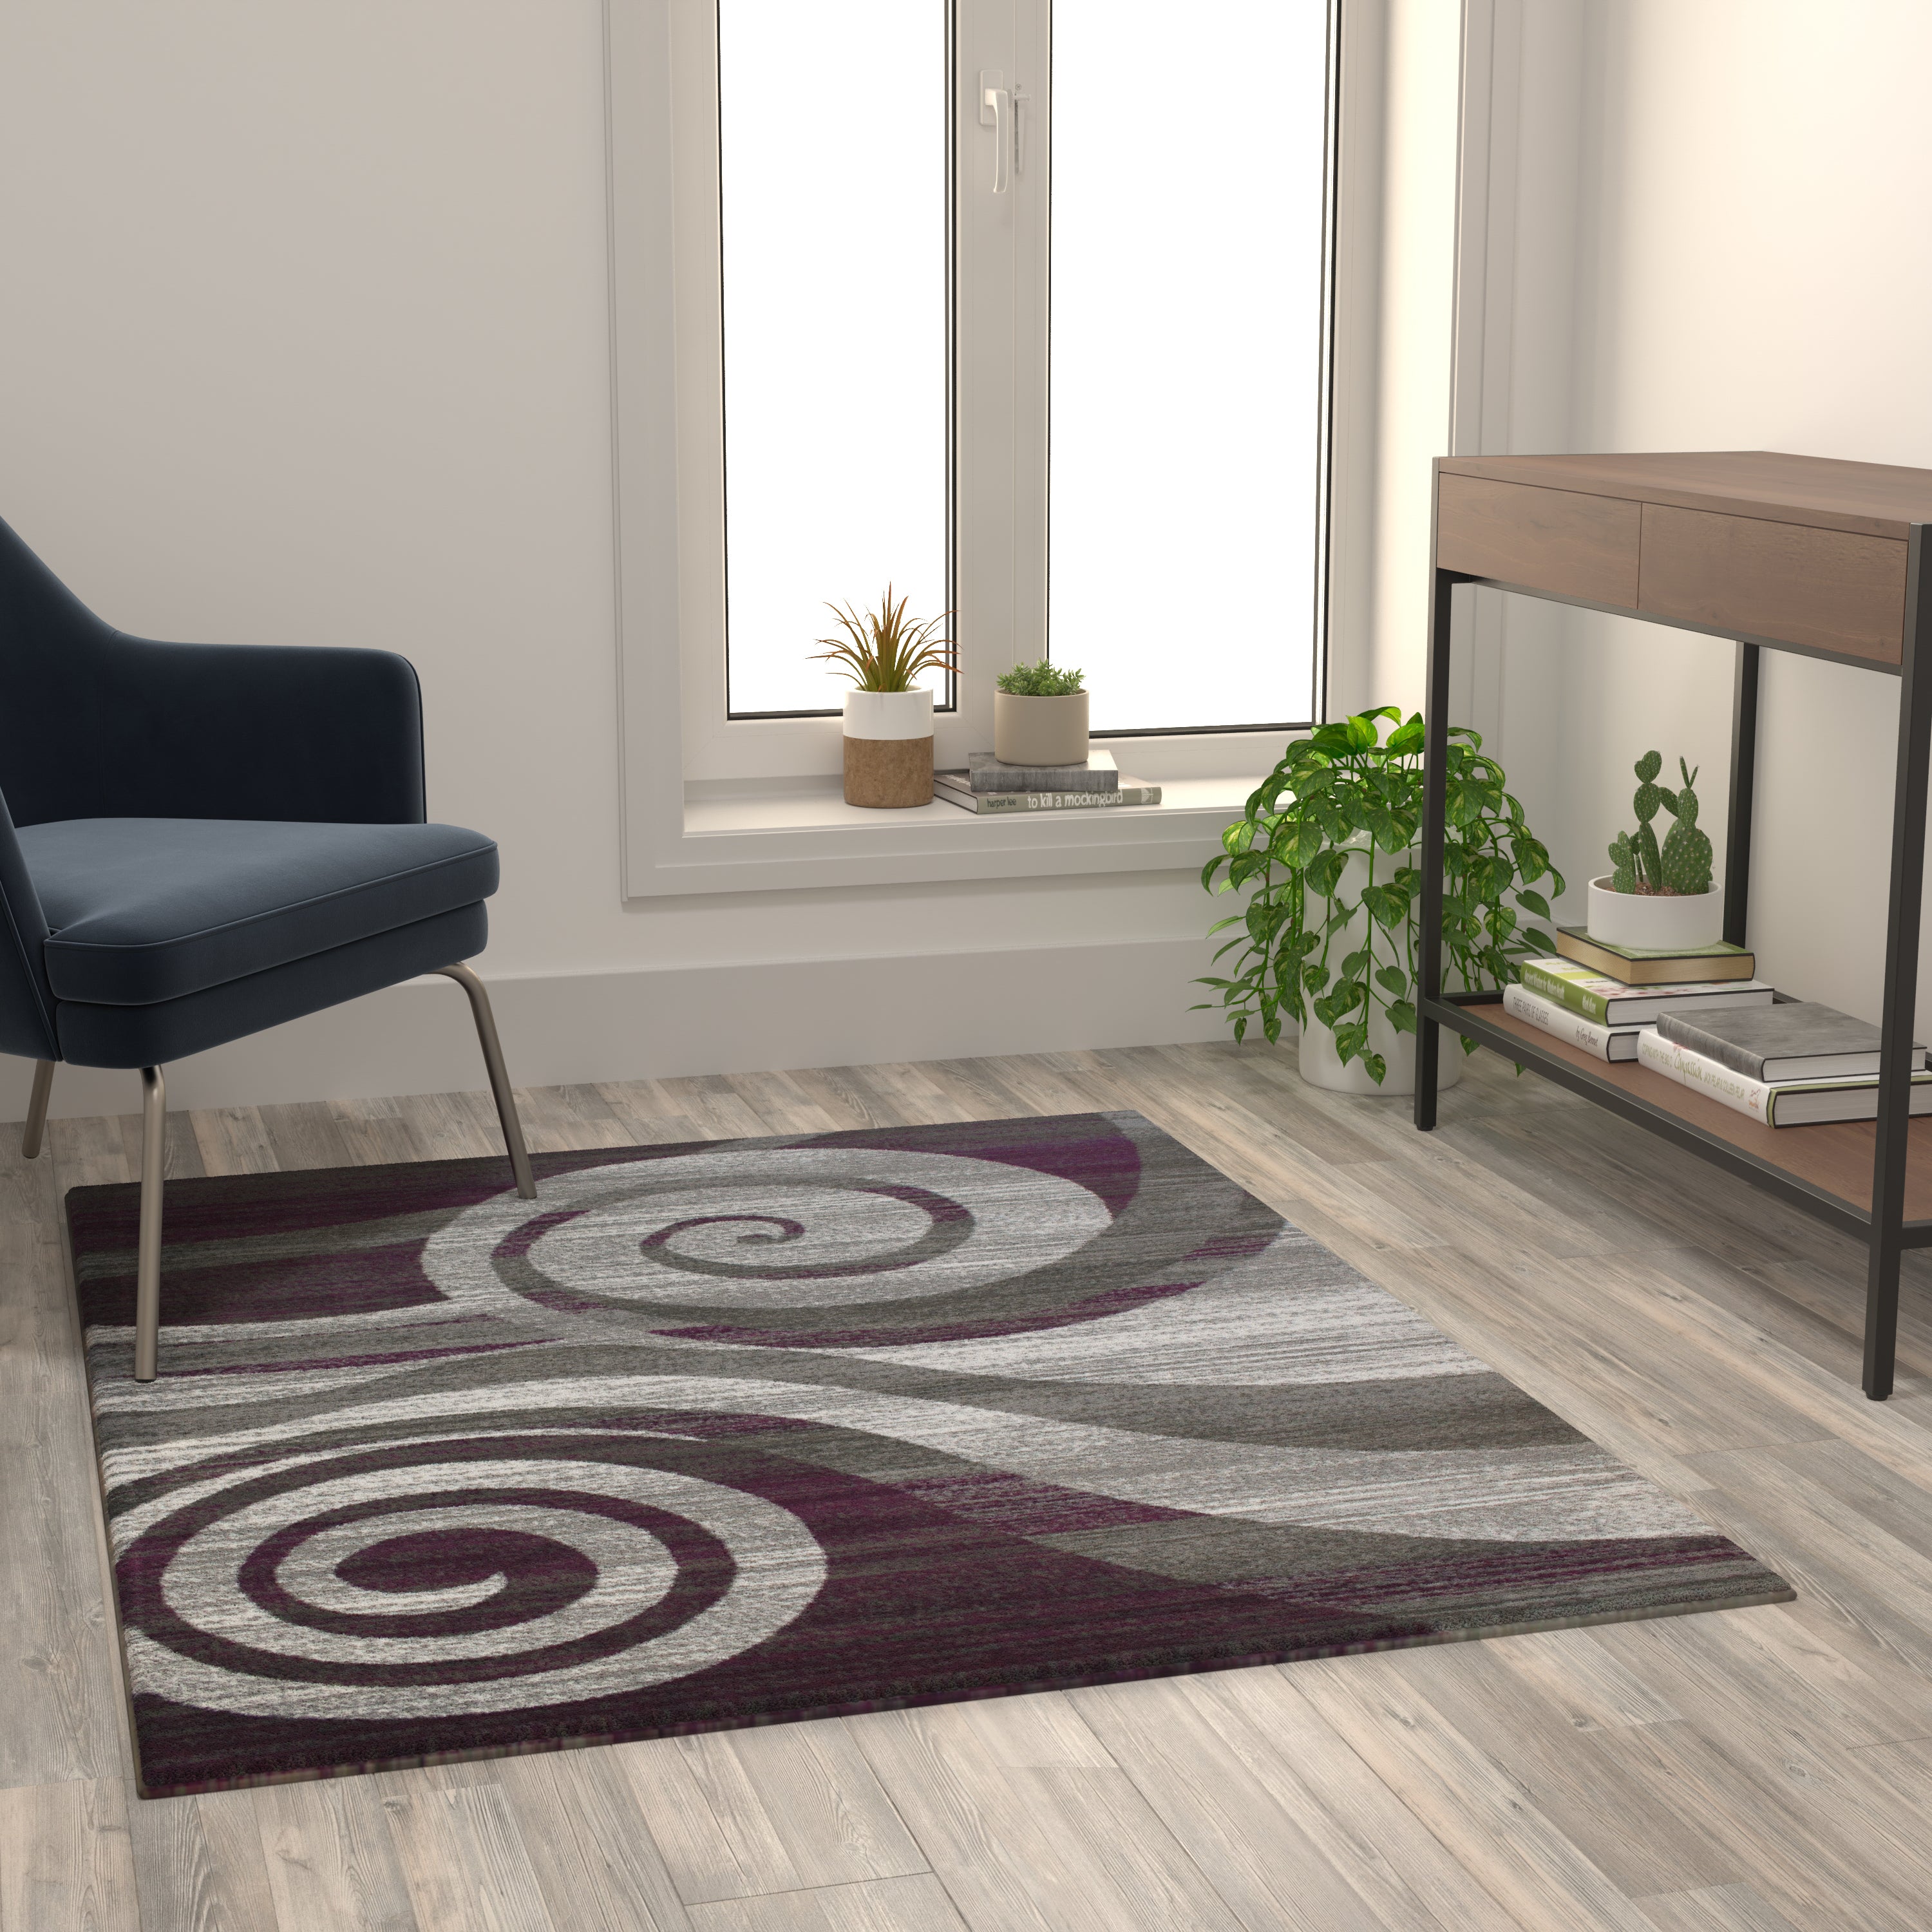 Cirrus Collection Swirl Patterned Olefin Area Rug with Jute Backing for Entryway, Living Room, Bedroom-Indoor Area Rug-Flash Furniture-Wall2Wall Furnishings